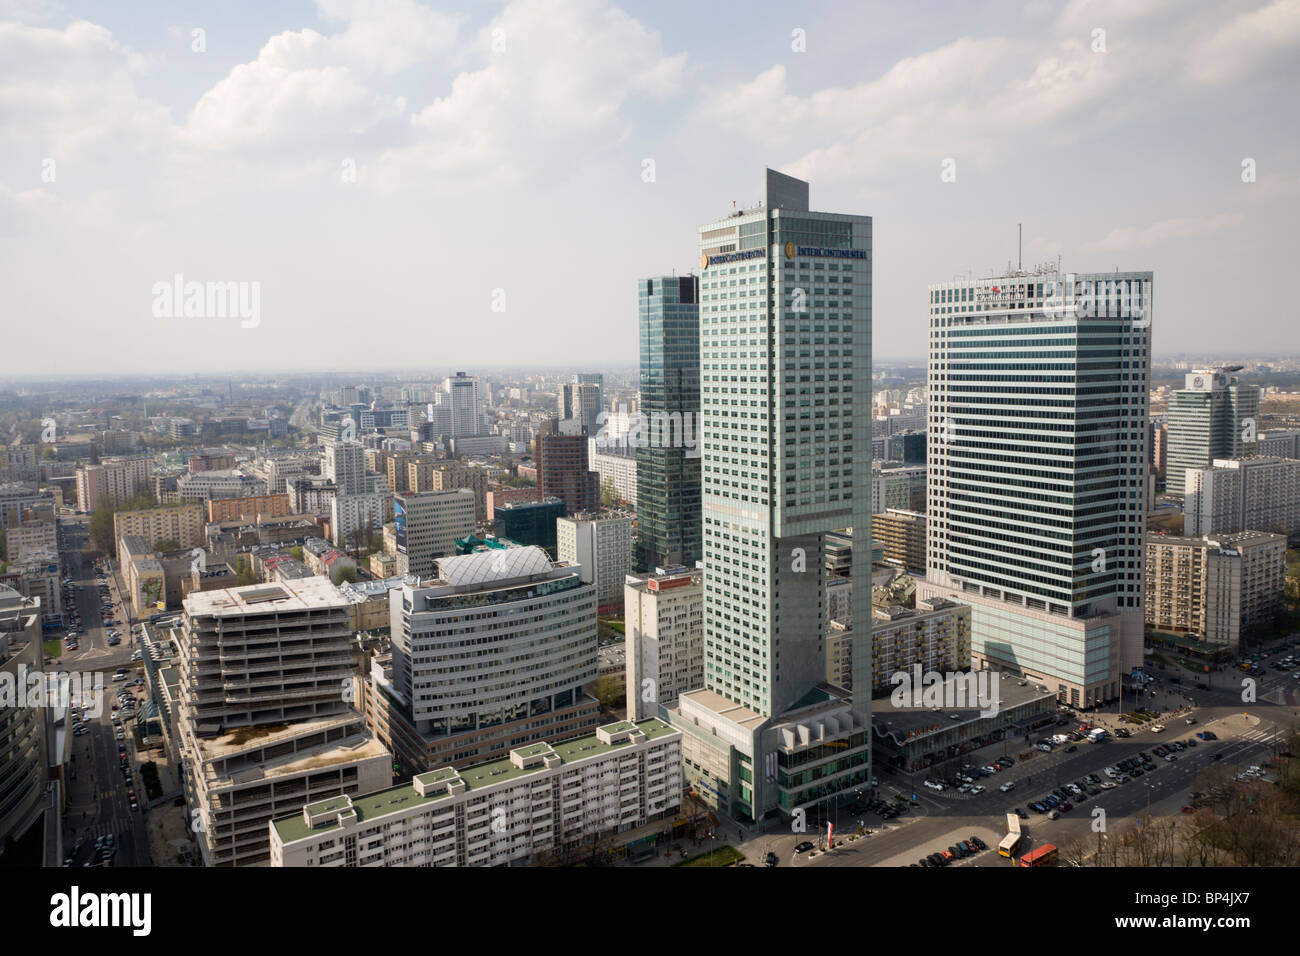 'Intercontinental' (C) and 'Warsaw Financial Center' (R). The view is from the Palace of Culture and Science, Warsaw Poland. Stock Photo